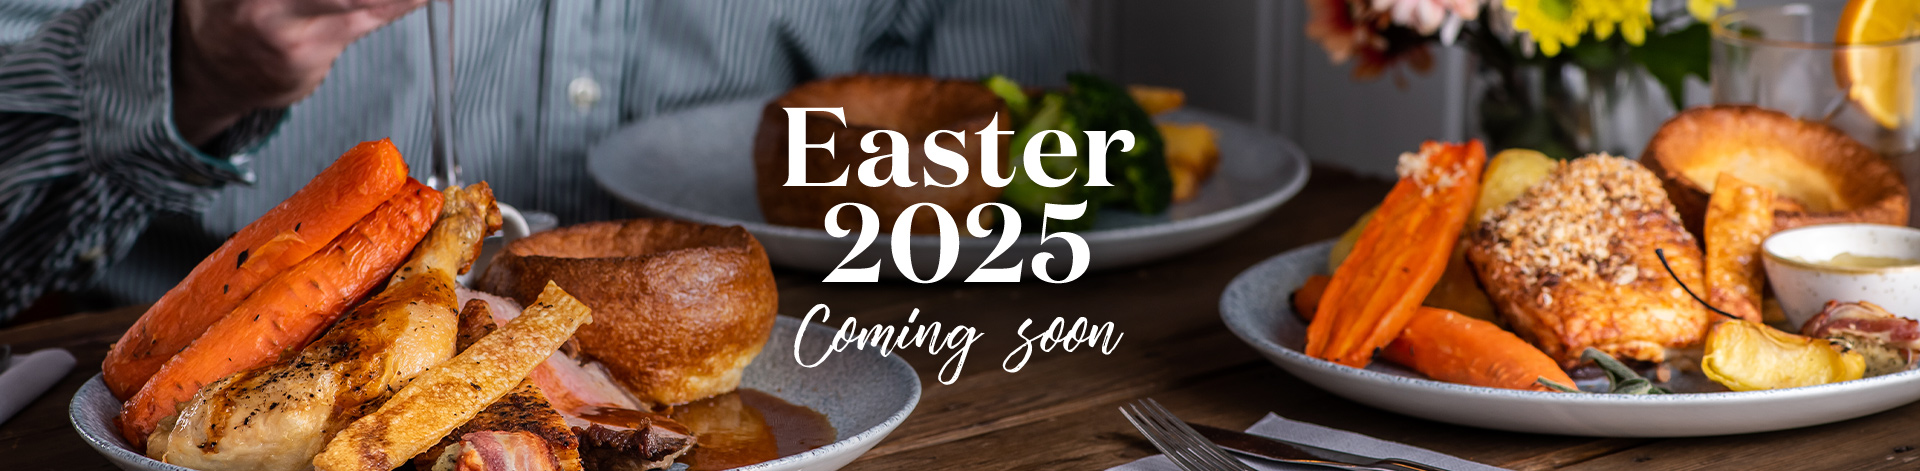 Easter at The King's Head, Wellesbourne in Warwick